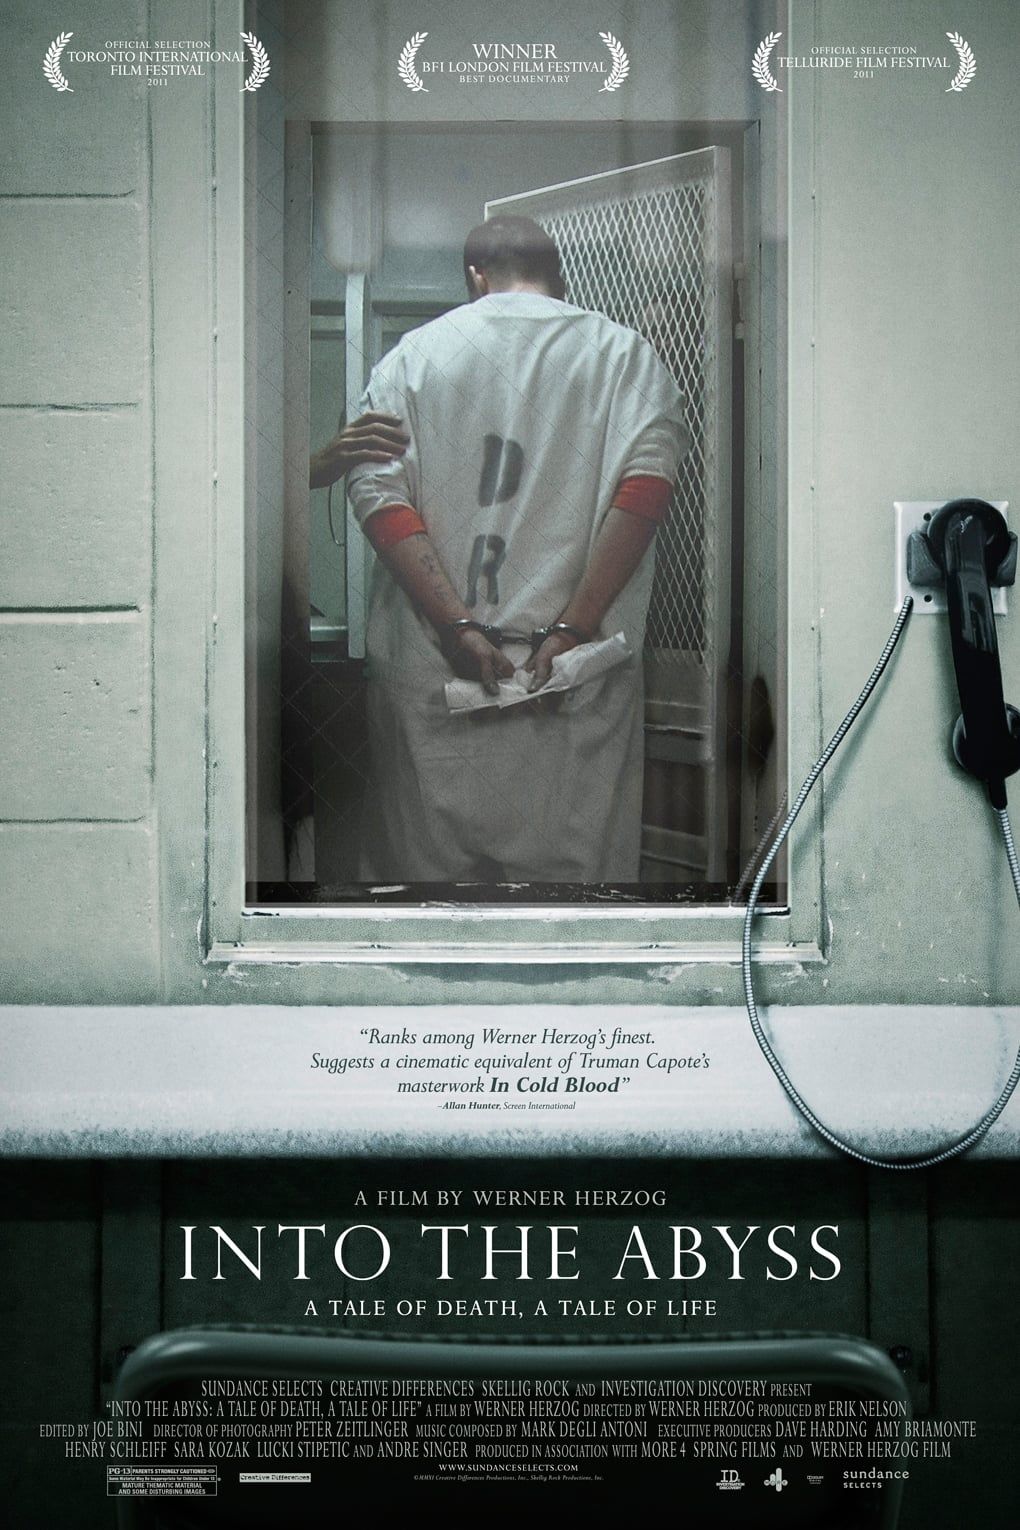 Into the Abyss: A Tale of Death, A Tale of Life